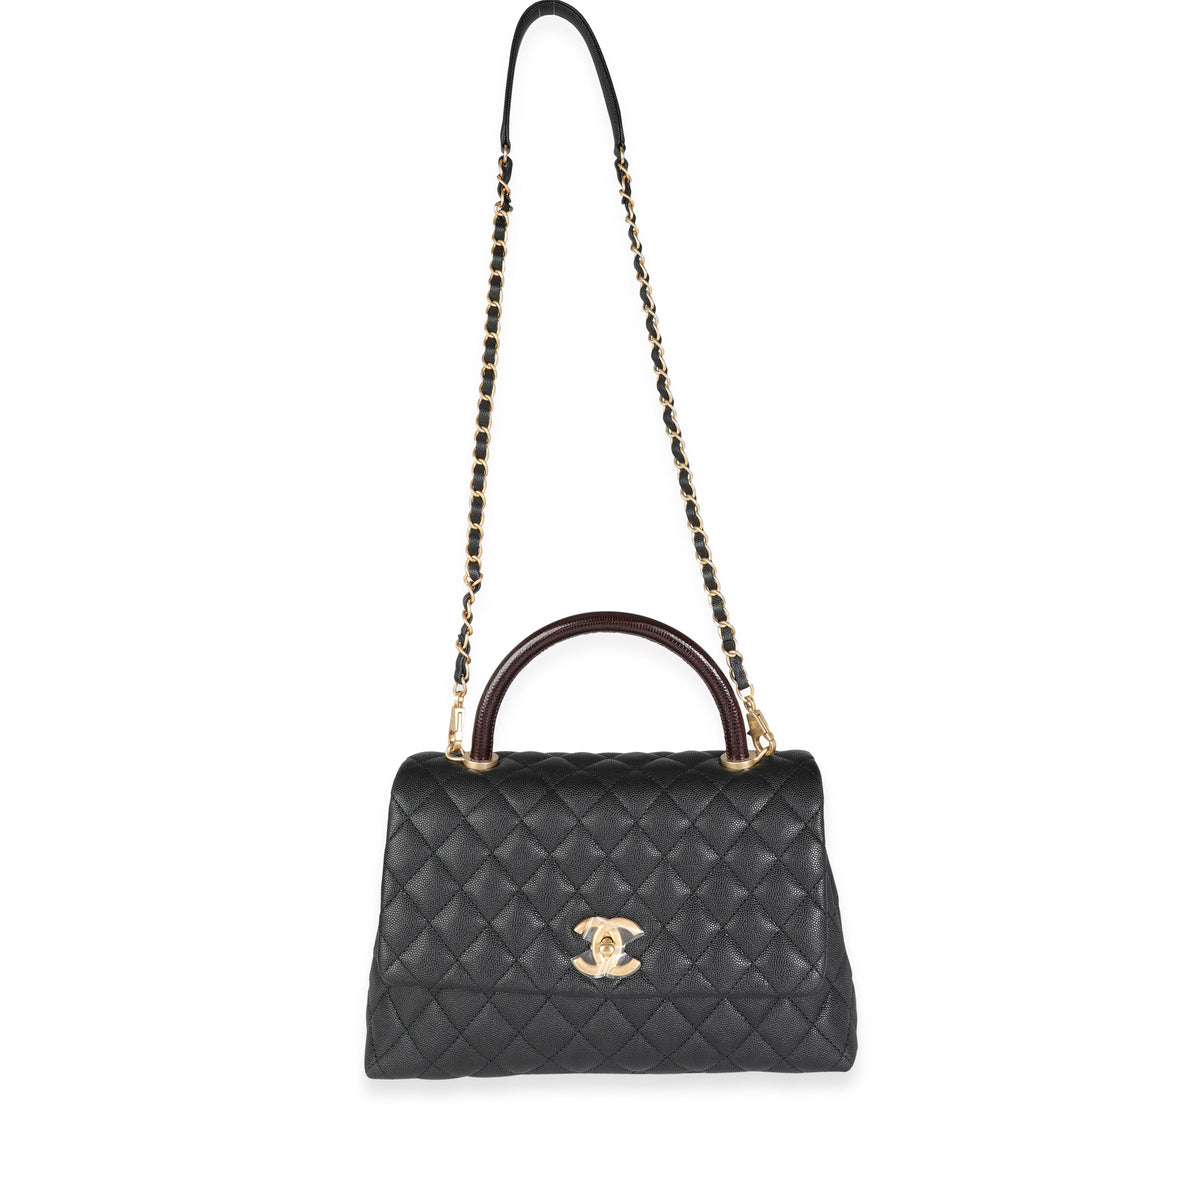 Chanel Black Quilted Caviar & Brown Lizard Embossed Medium Coco